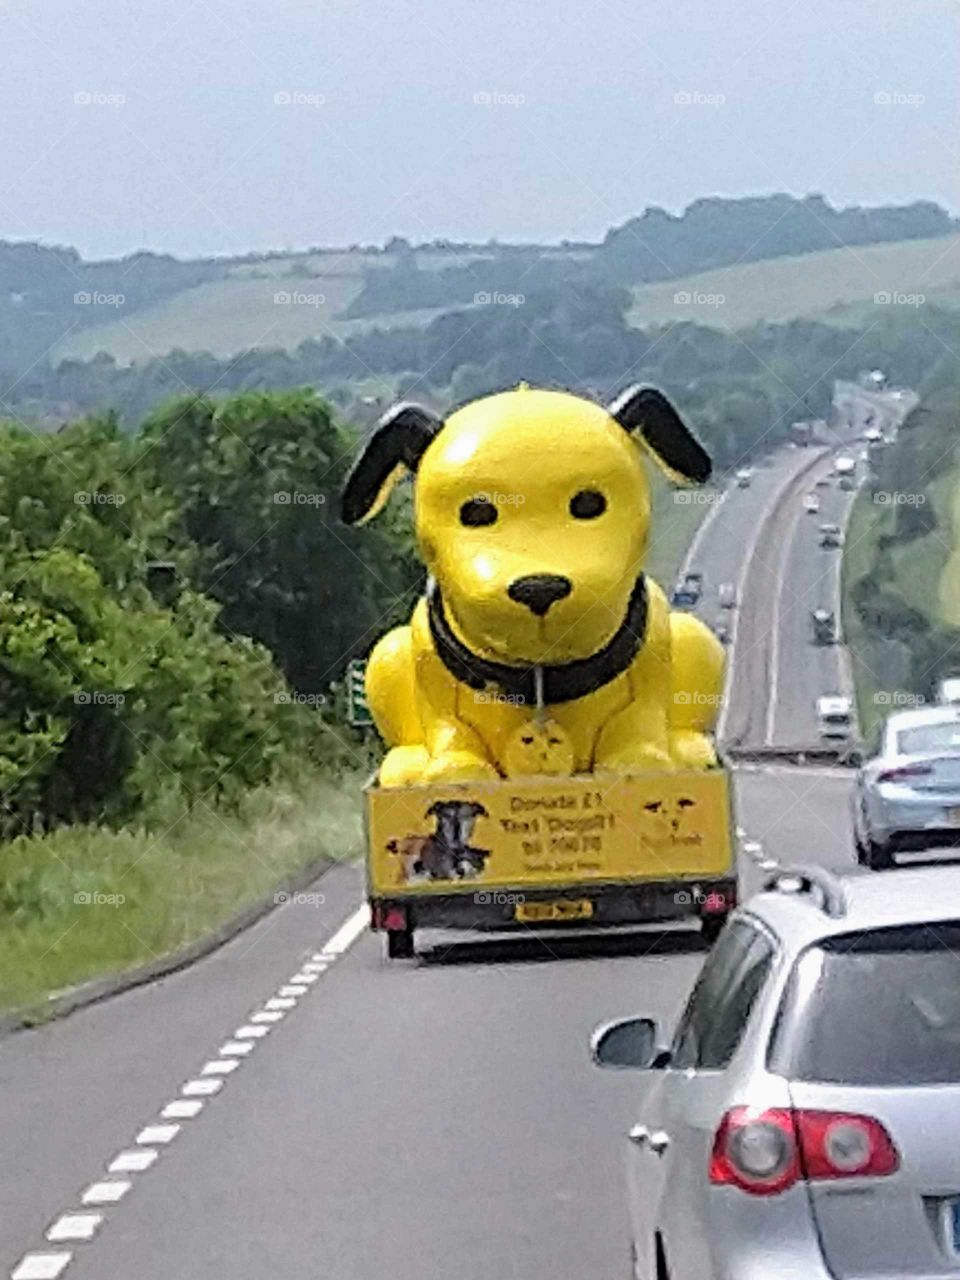 Amazing What Is Seen On The Roads Today!